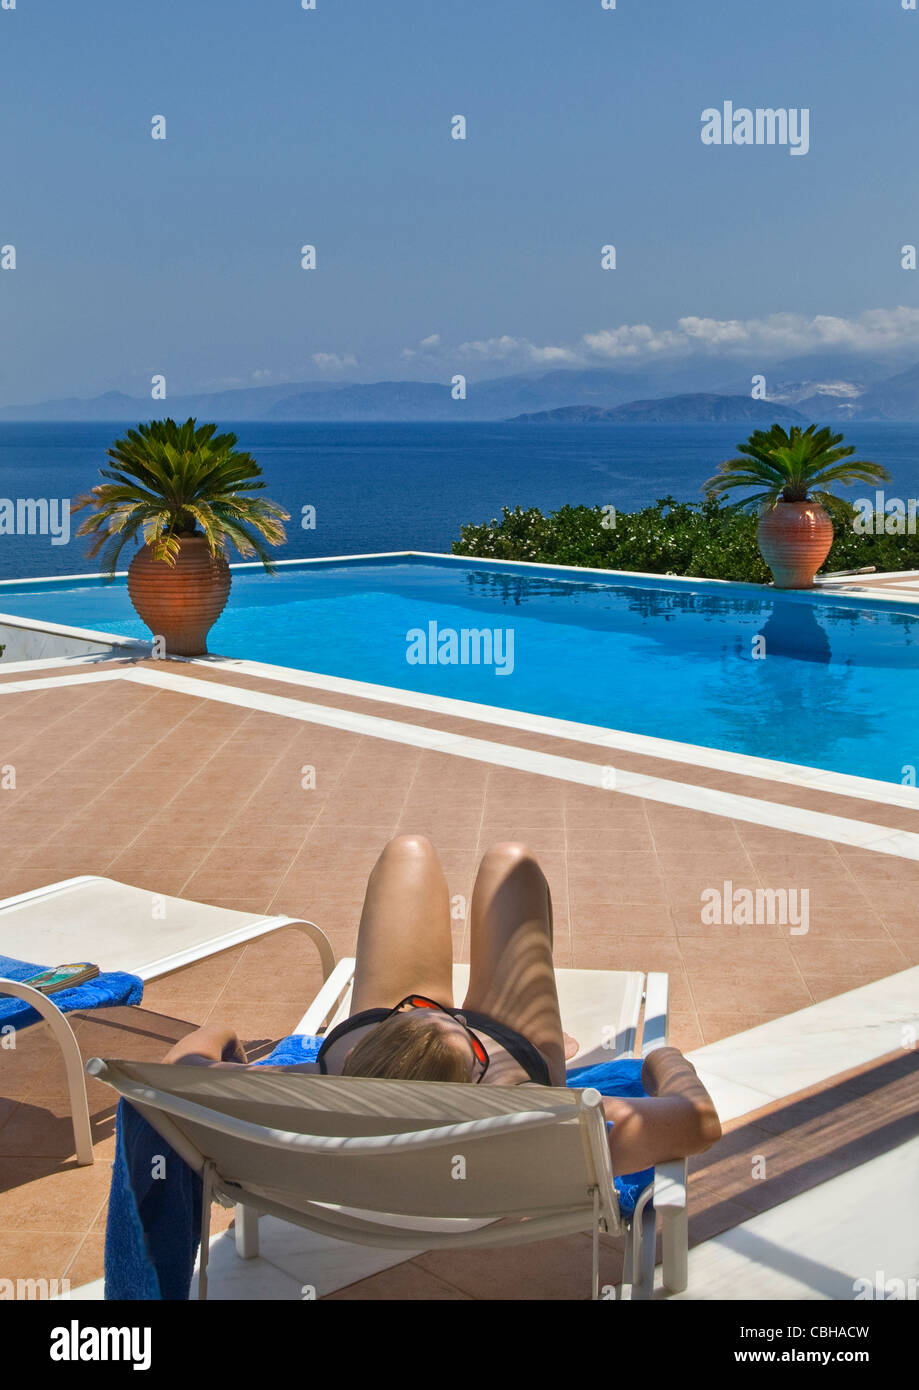 Holiday Woman infinity pool relaxing on vacation sun lounger with luxury infinity pool and coastal sea view behind Stock Photo